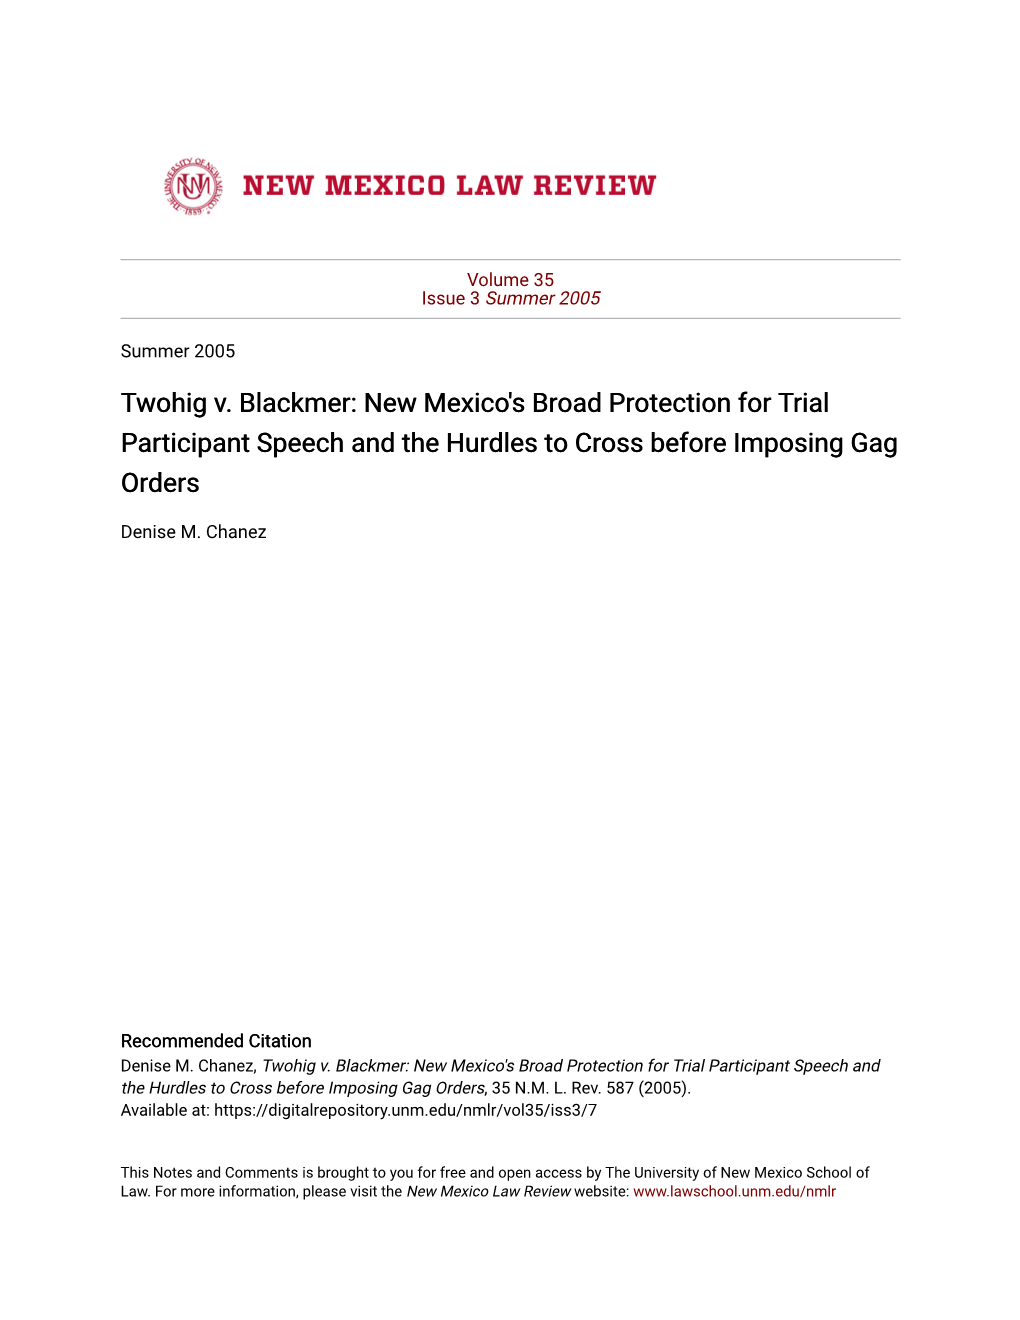 Twohig V. Blackmer: New Mexico's Broad Protection for Trial Participant Speech and the Hurdles to Cross Before Imposing Gag Orders